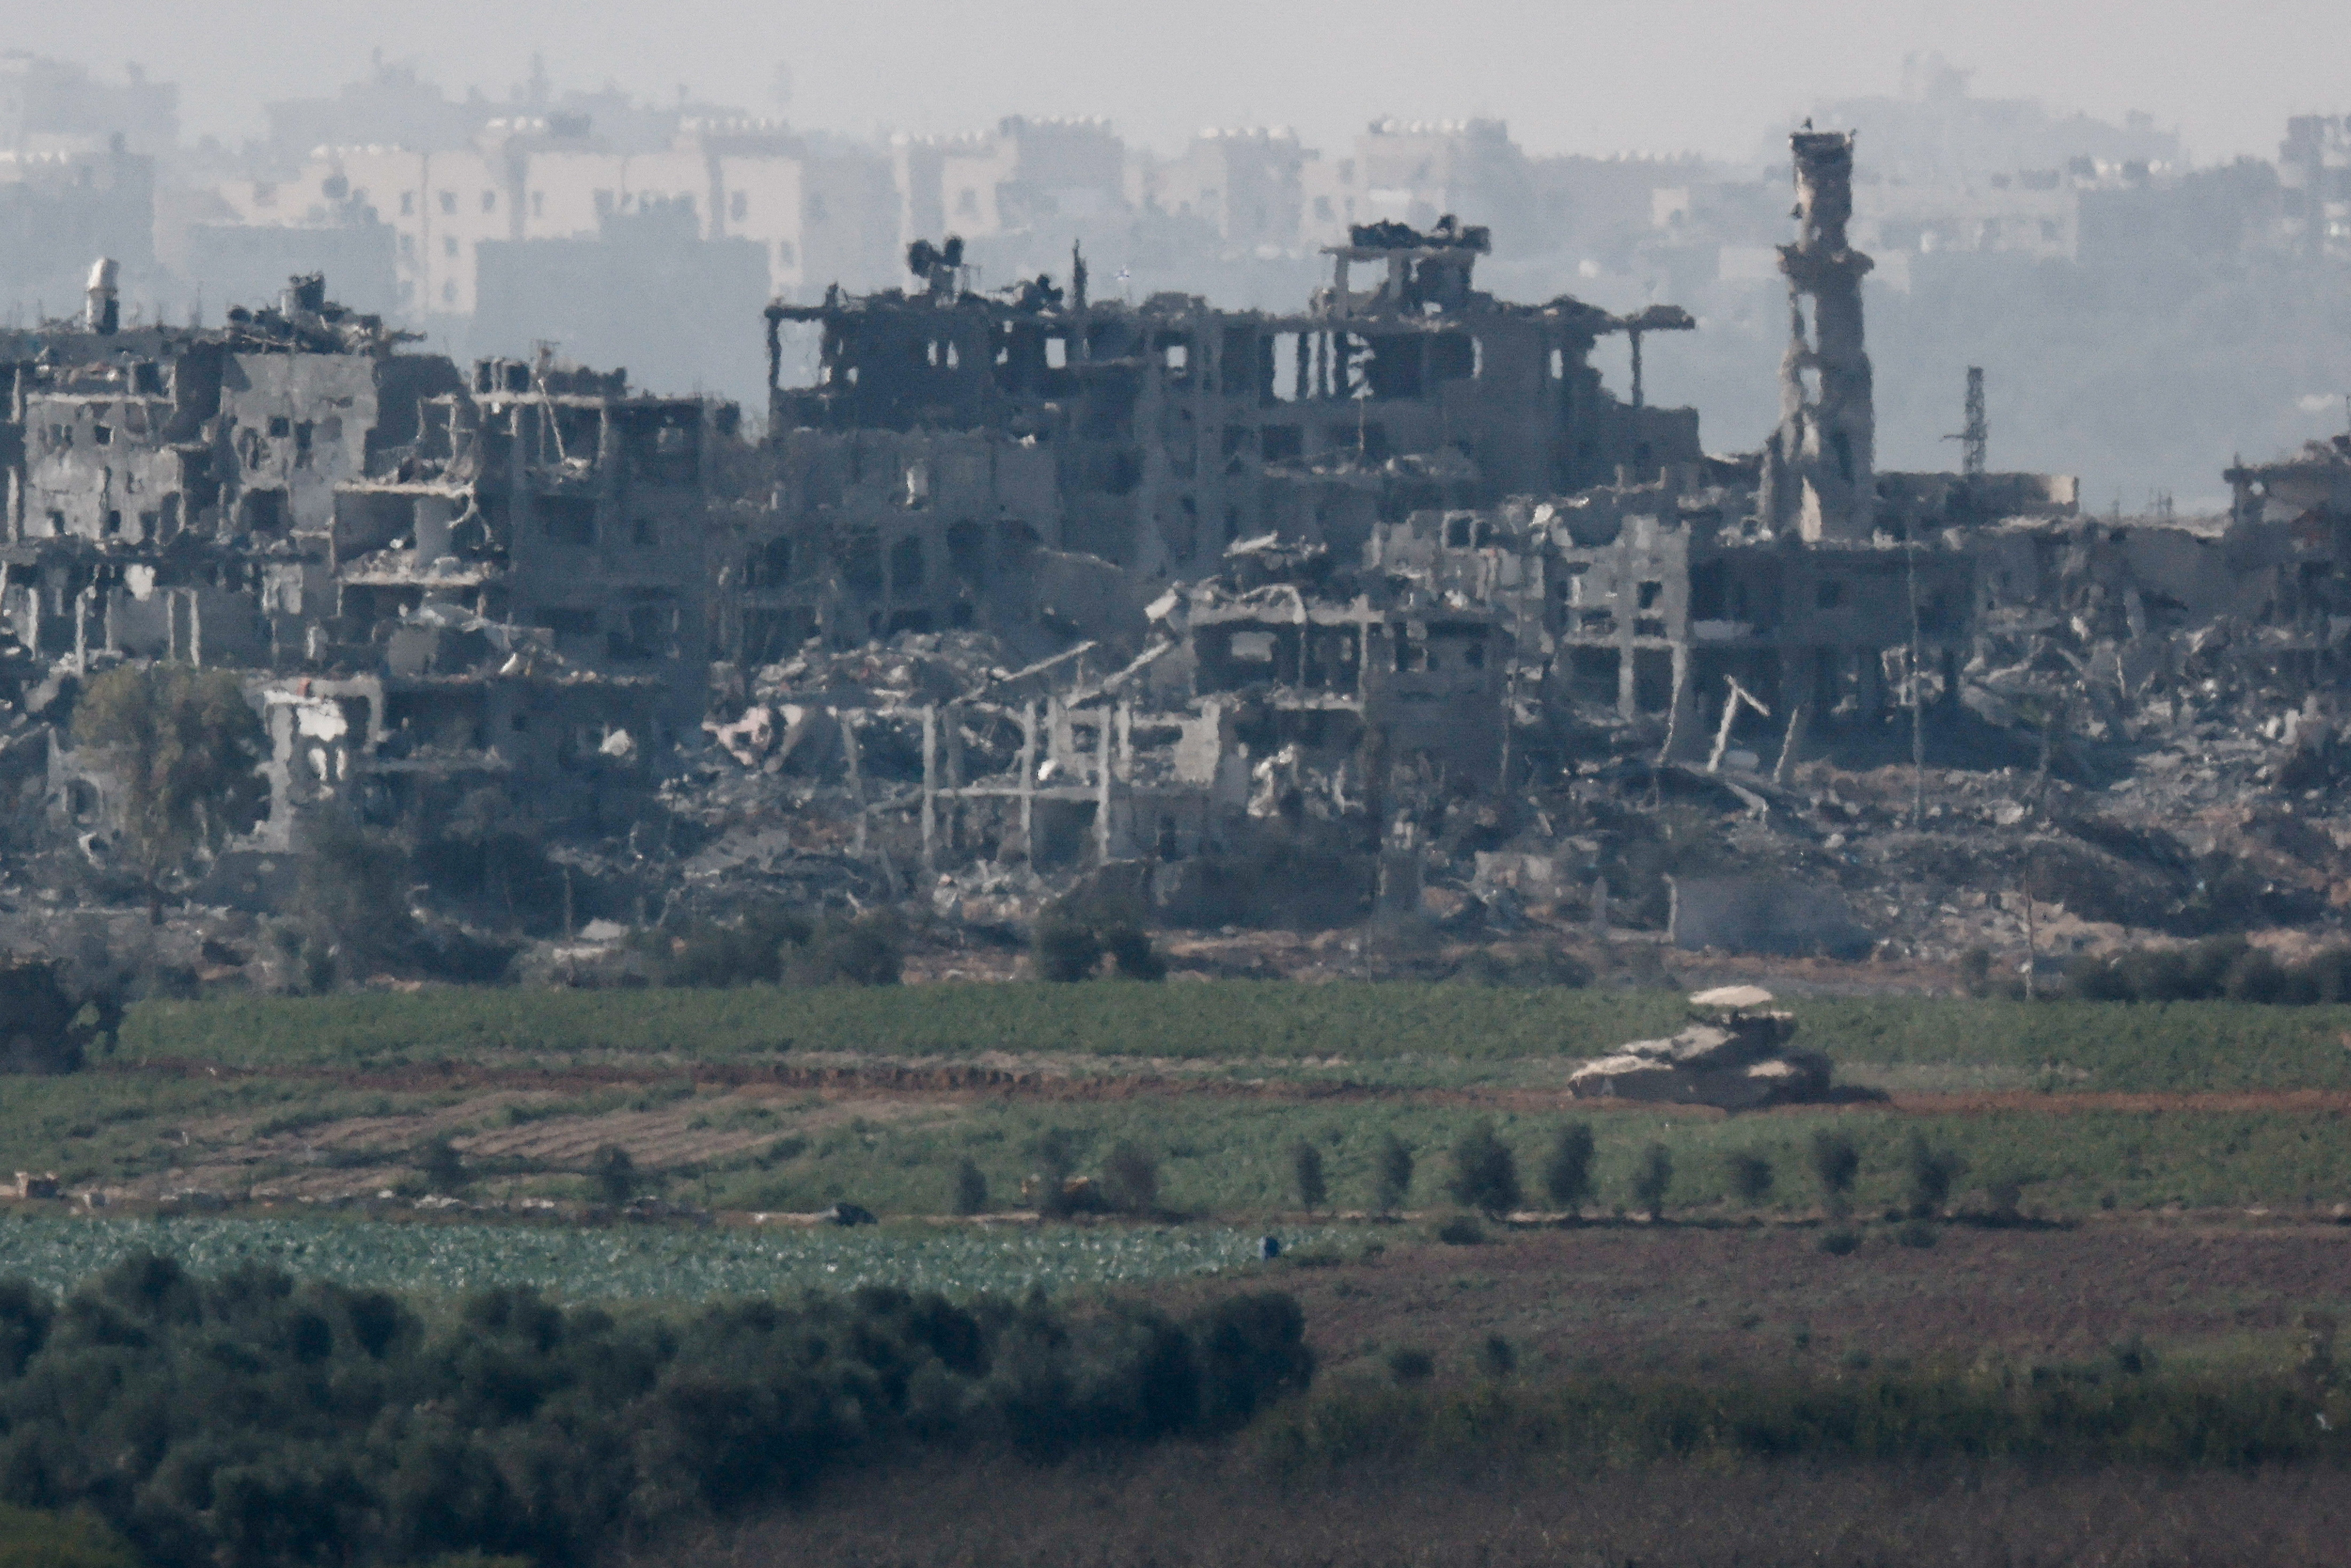 A tank manoeuvres inside Gaza Strip, as seen from the city of Sderot